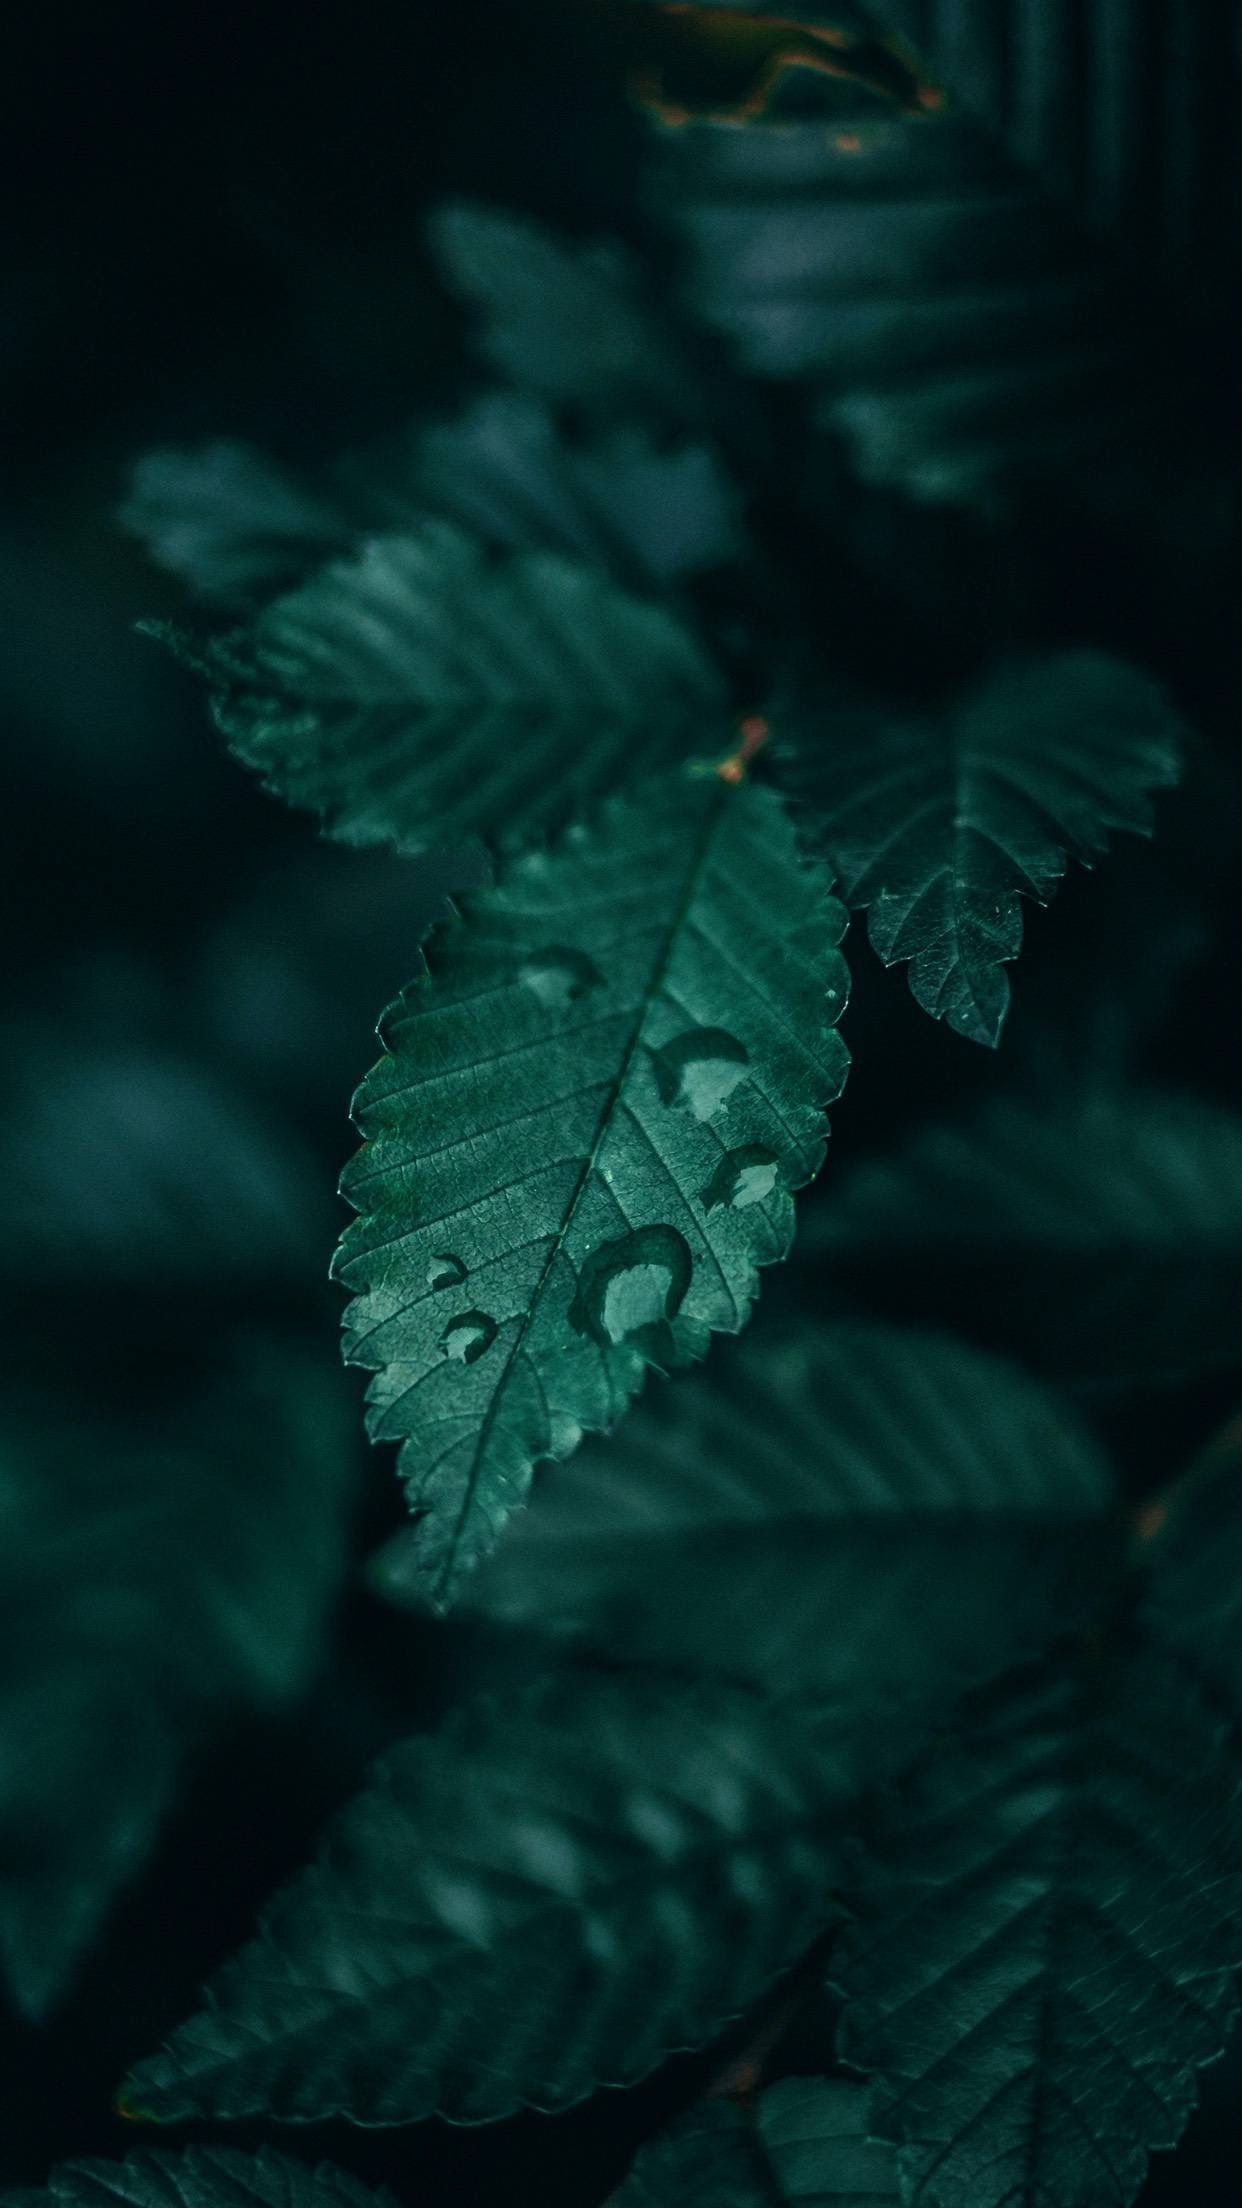 Green leaf with water drops on it in a dark forest. - Slytherin, dark green